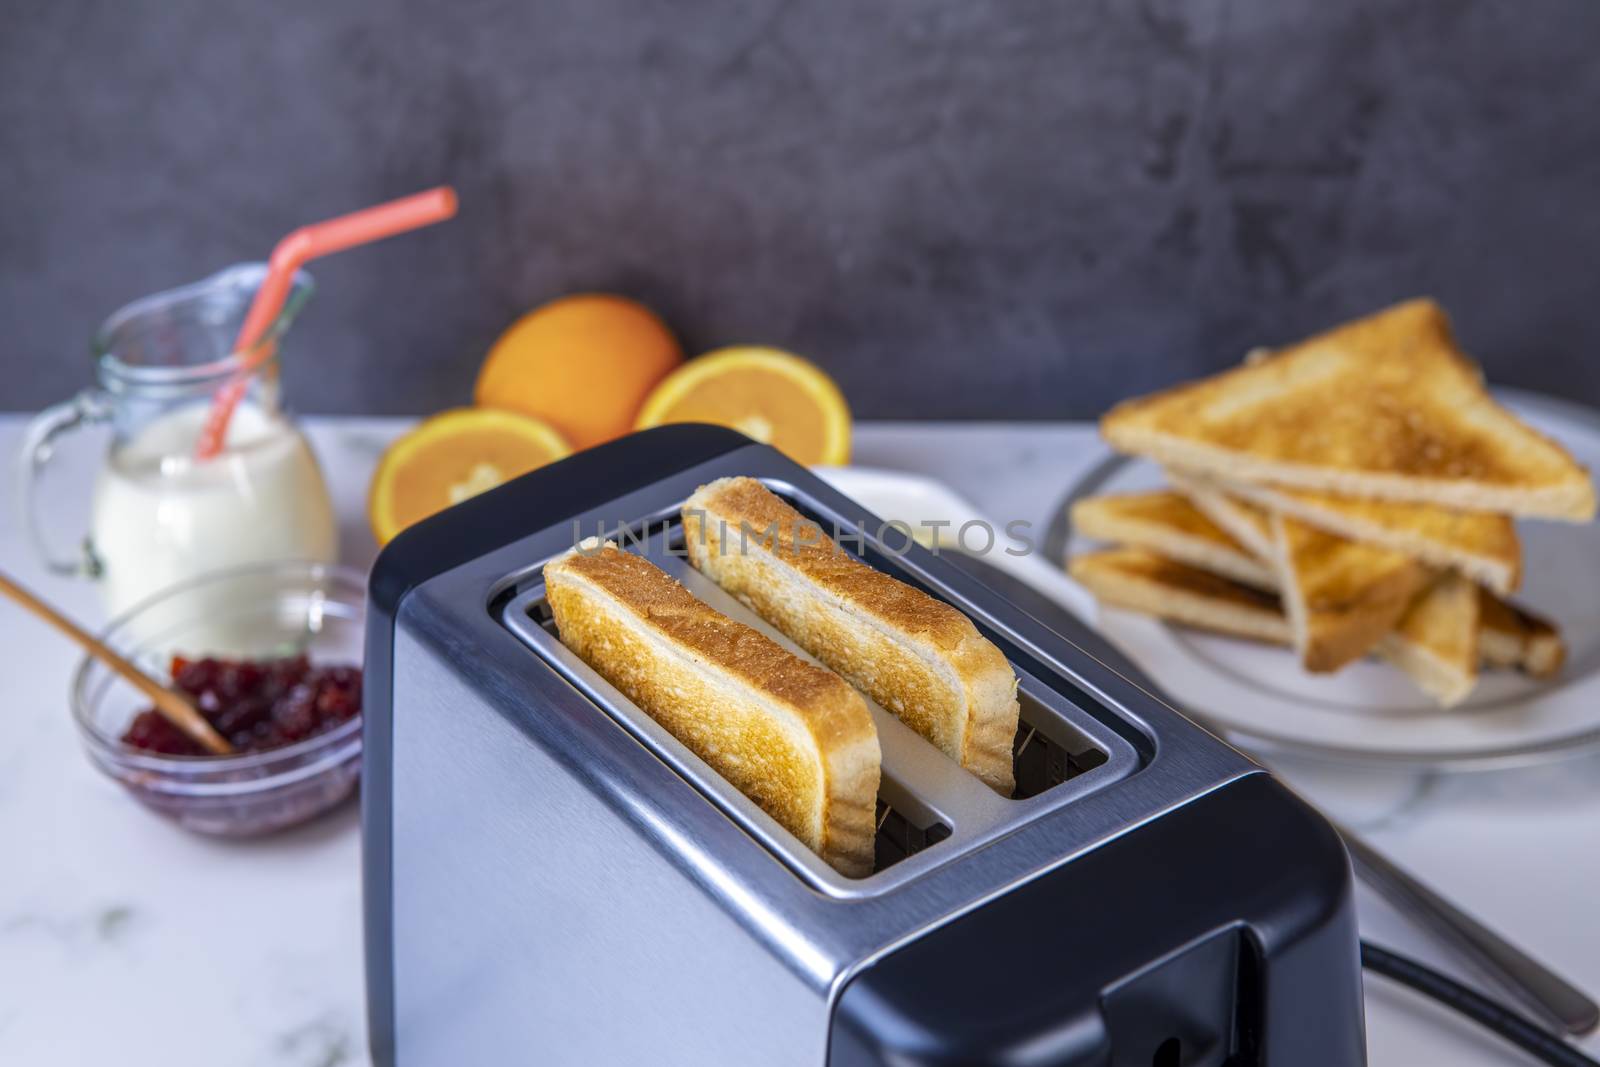 Slices of toast coming out of the toaster for healthy breakfast by manaemedia